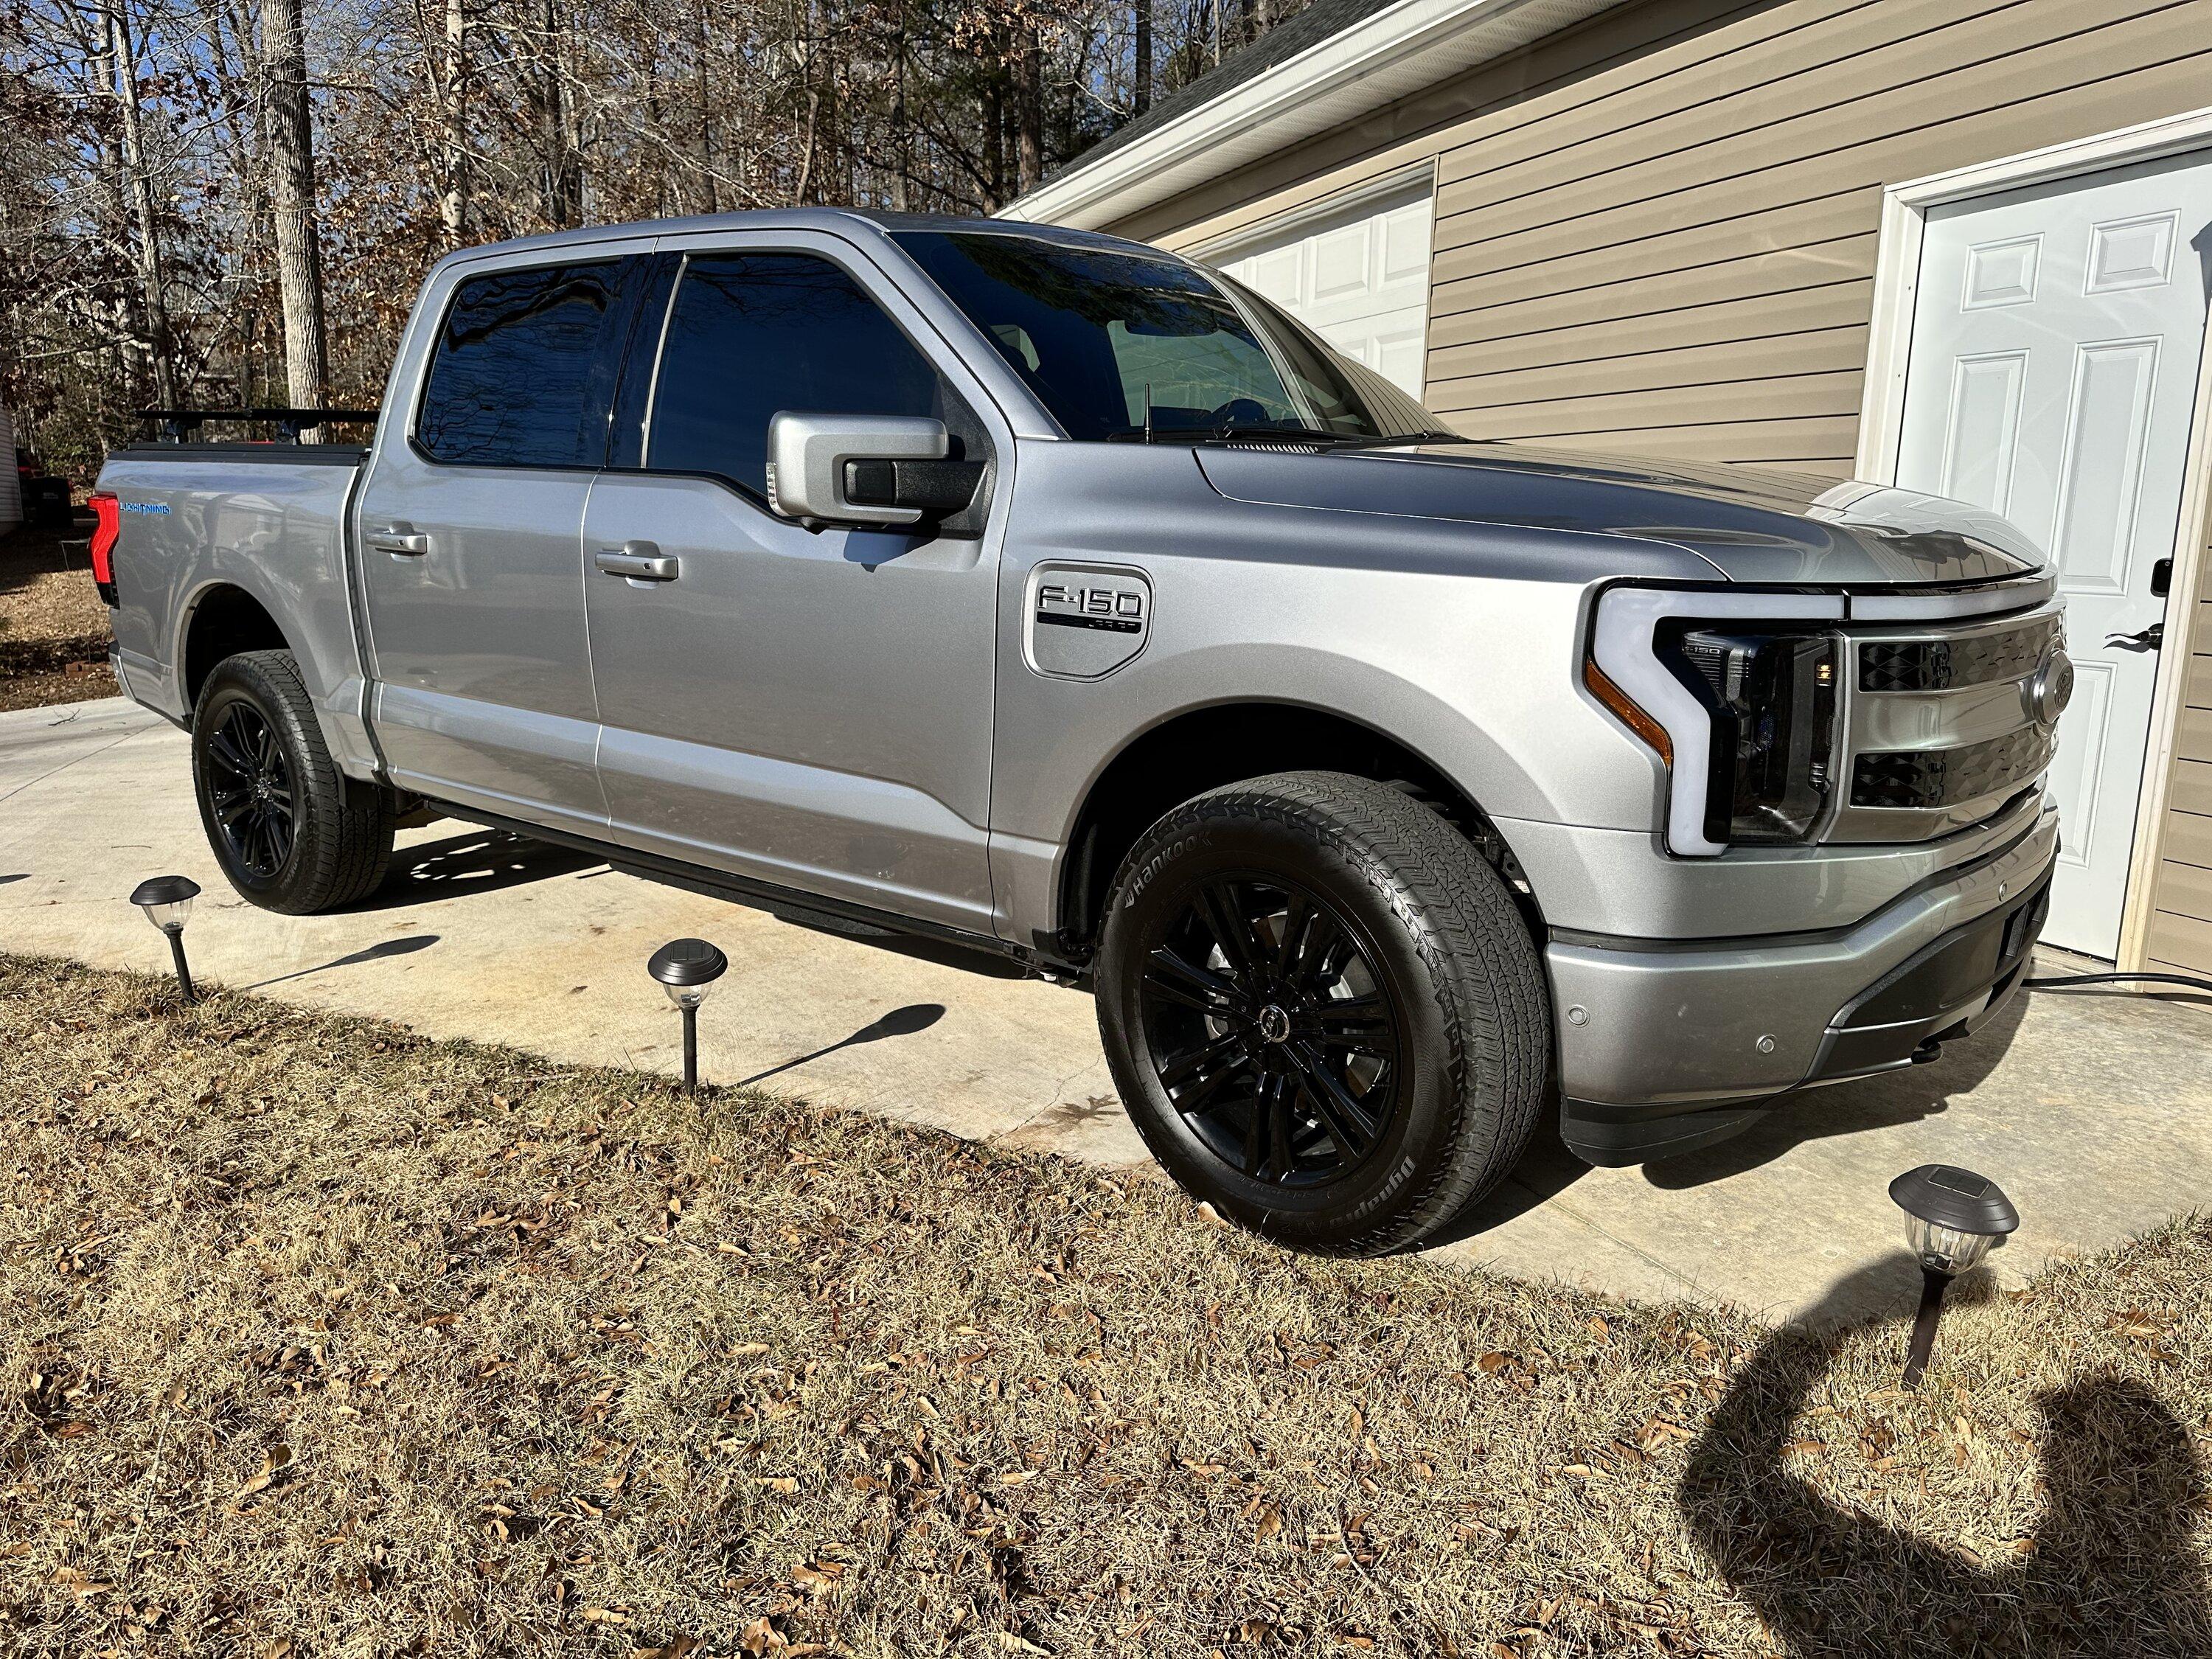 Ford F-150 Lightning Another new mod: changed the tonneau cover to a Power RetraxPro XR and Yakima cross bars 5401BAB3-010D-4B85-B42E-9B280906666A